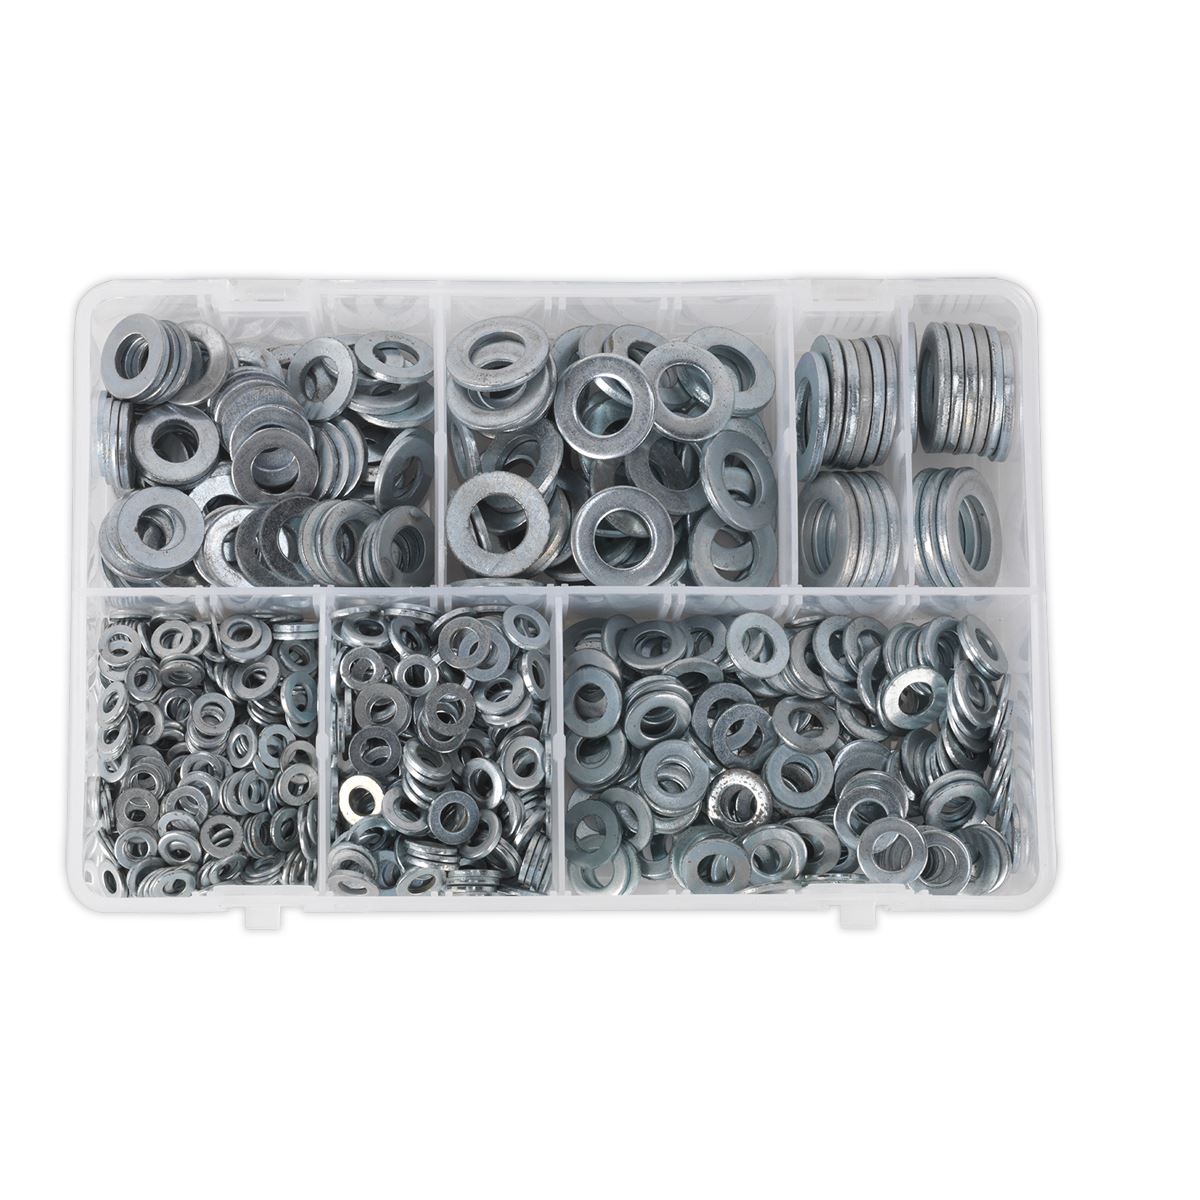 Sealey 1070 Piece Flat Washer Assortment DIN 125 M5-M16 Form A Metric